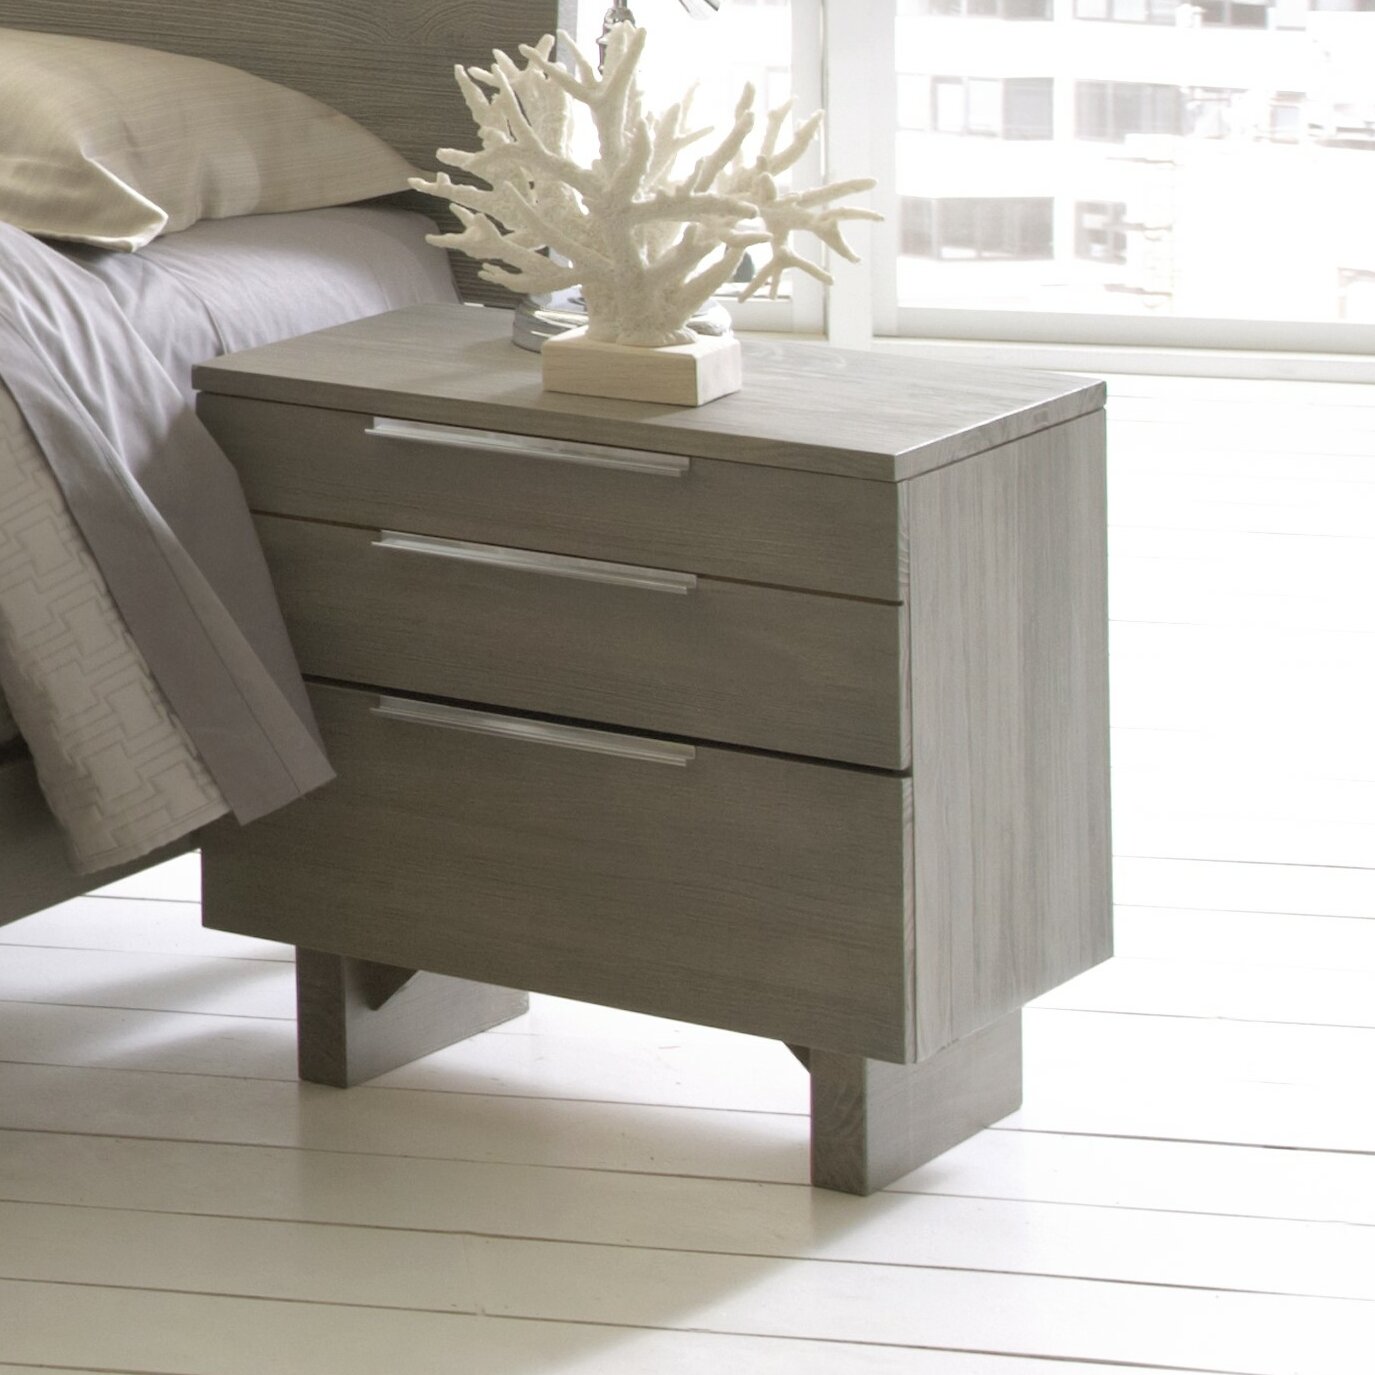 Unfinished Wood - Dressers, Chest of Drawers Nightstands